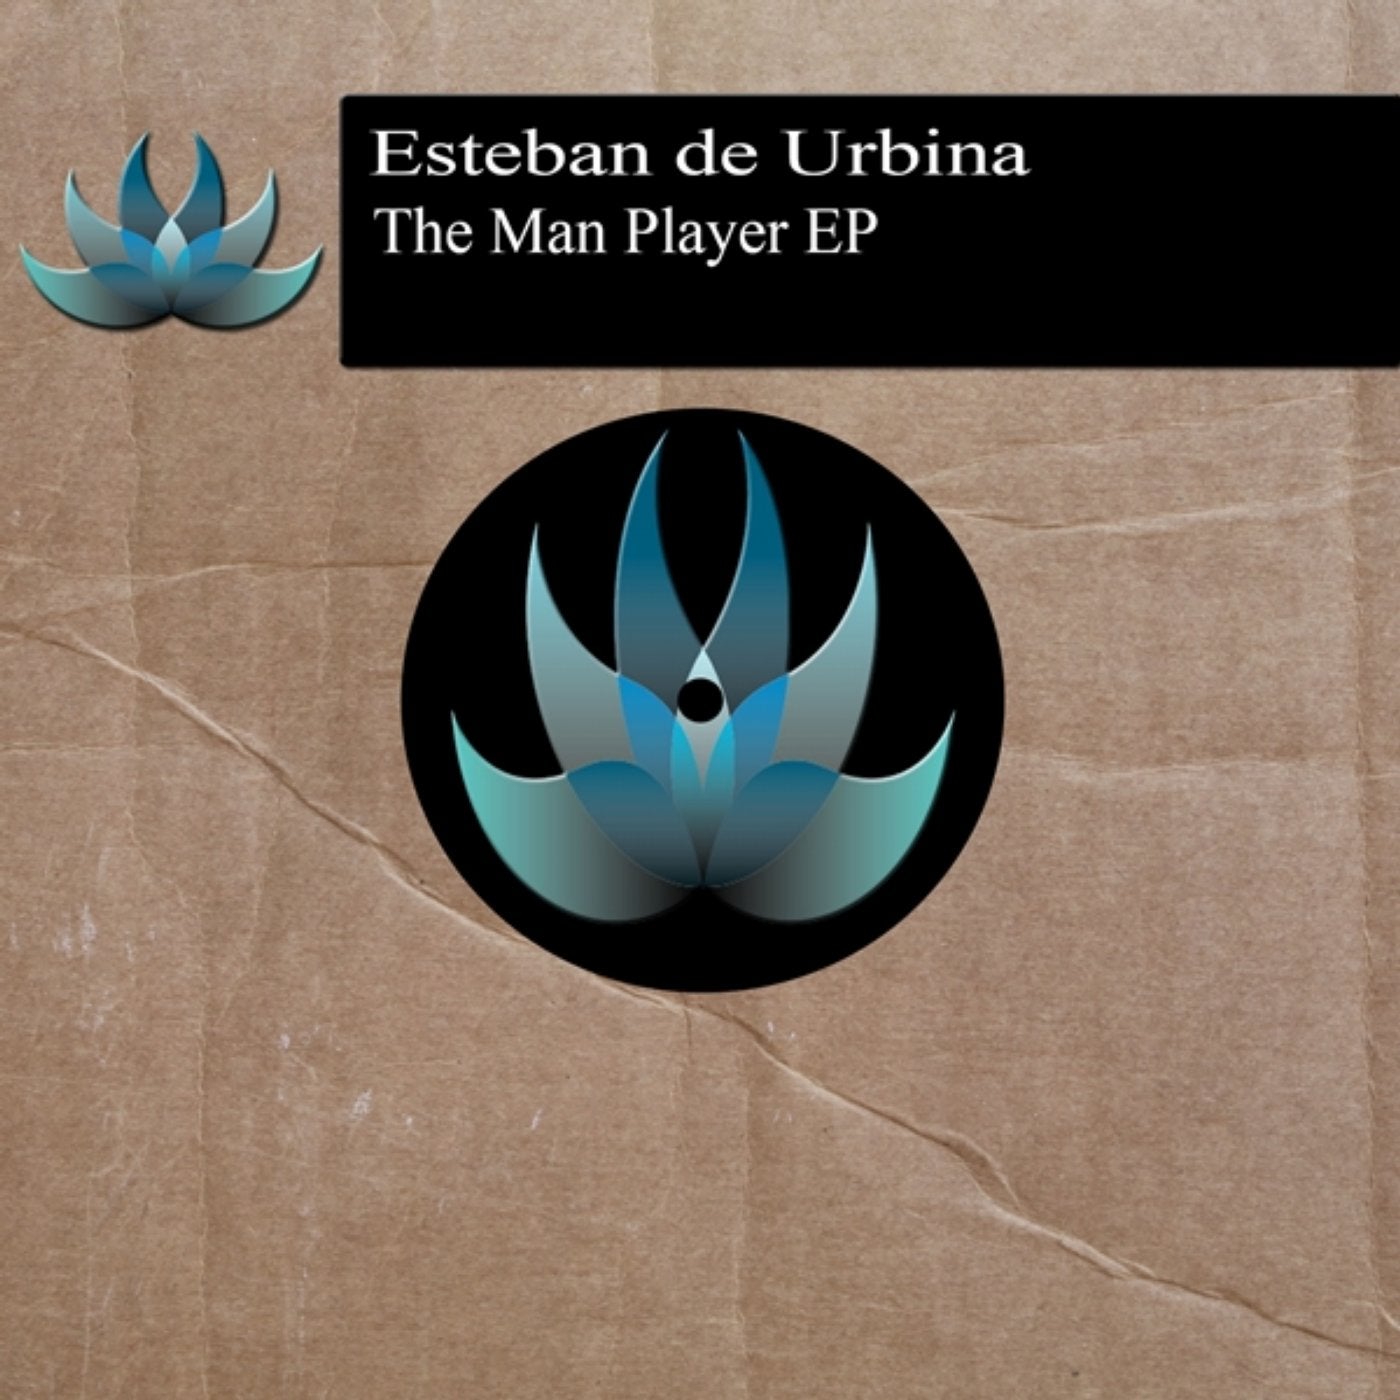 The Man Player EP